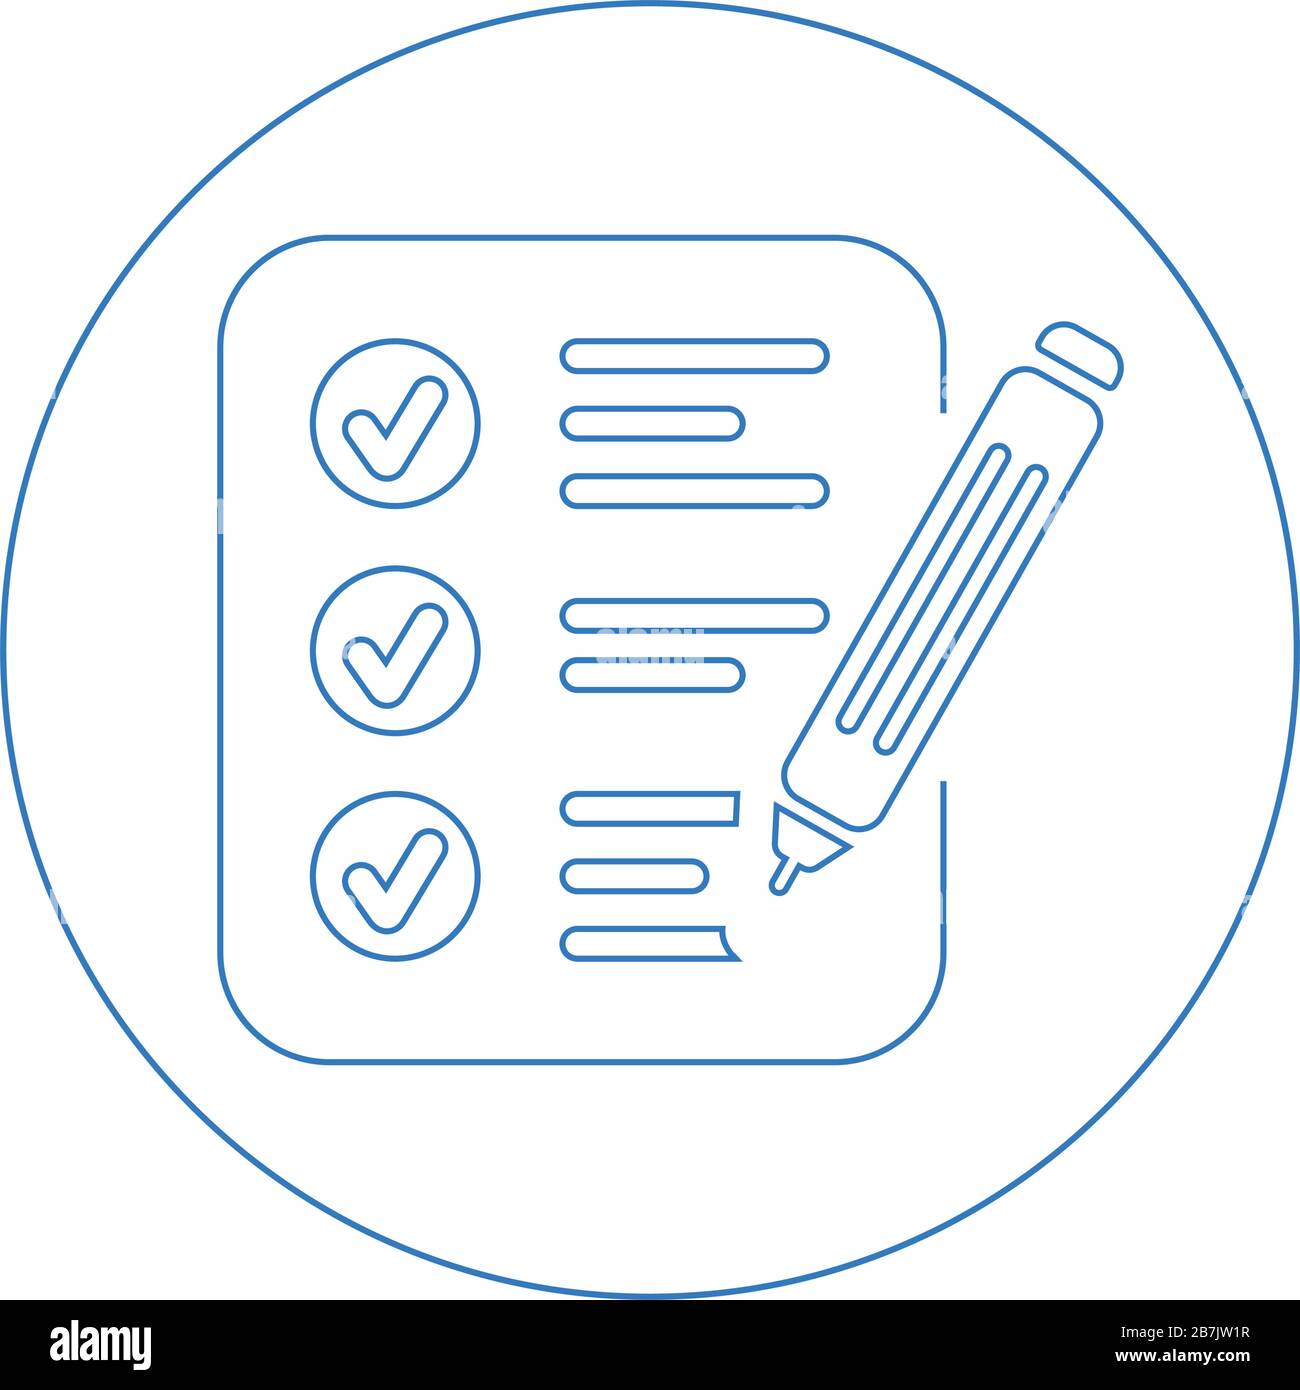 Audit, exam, survey report icon for any use like print, website etc. Stock Vector